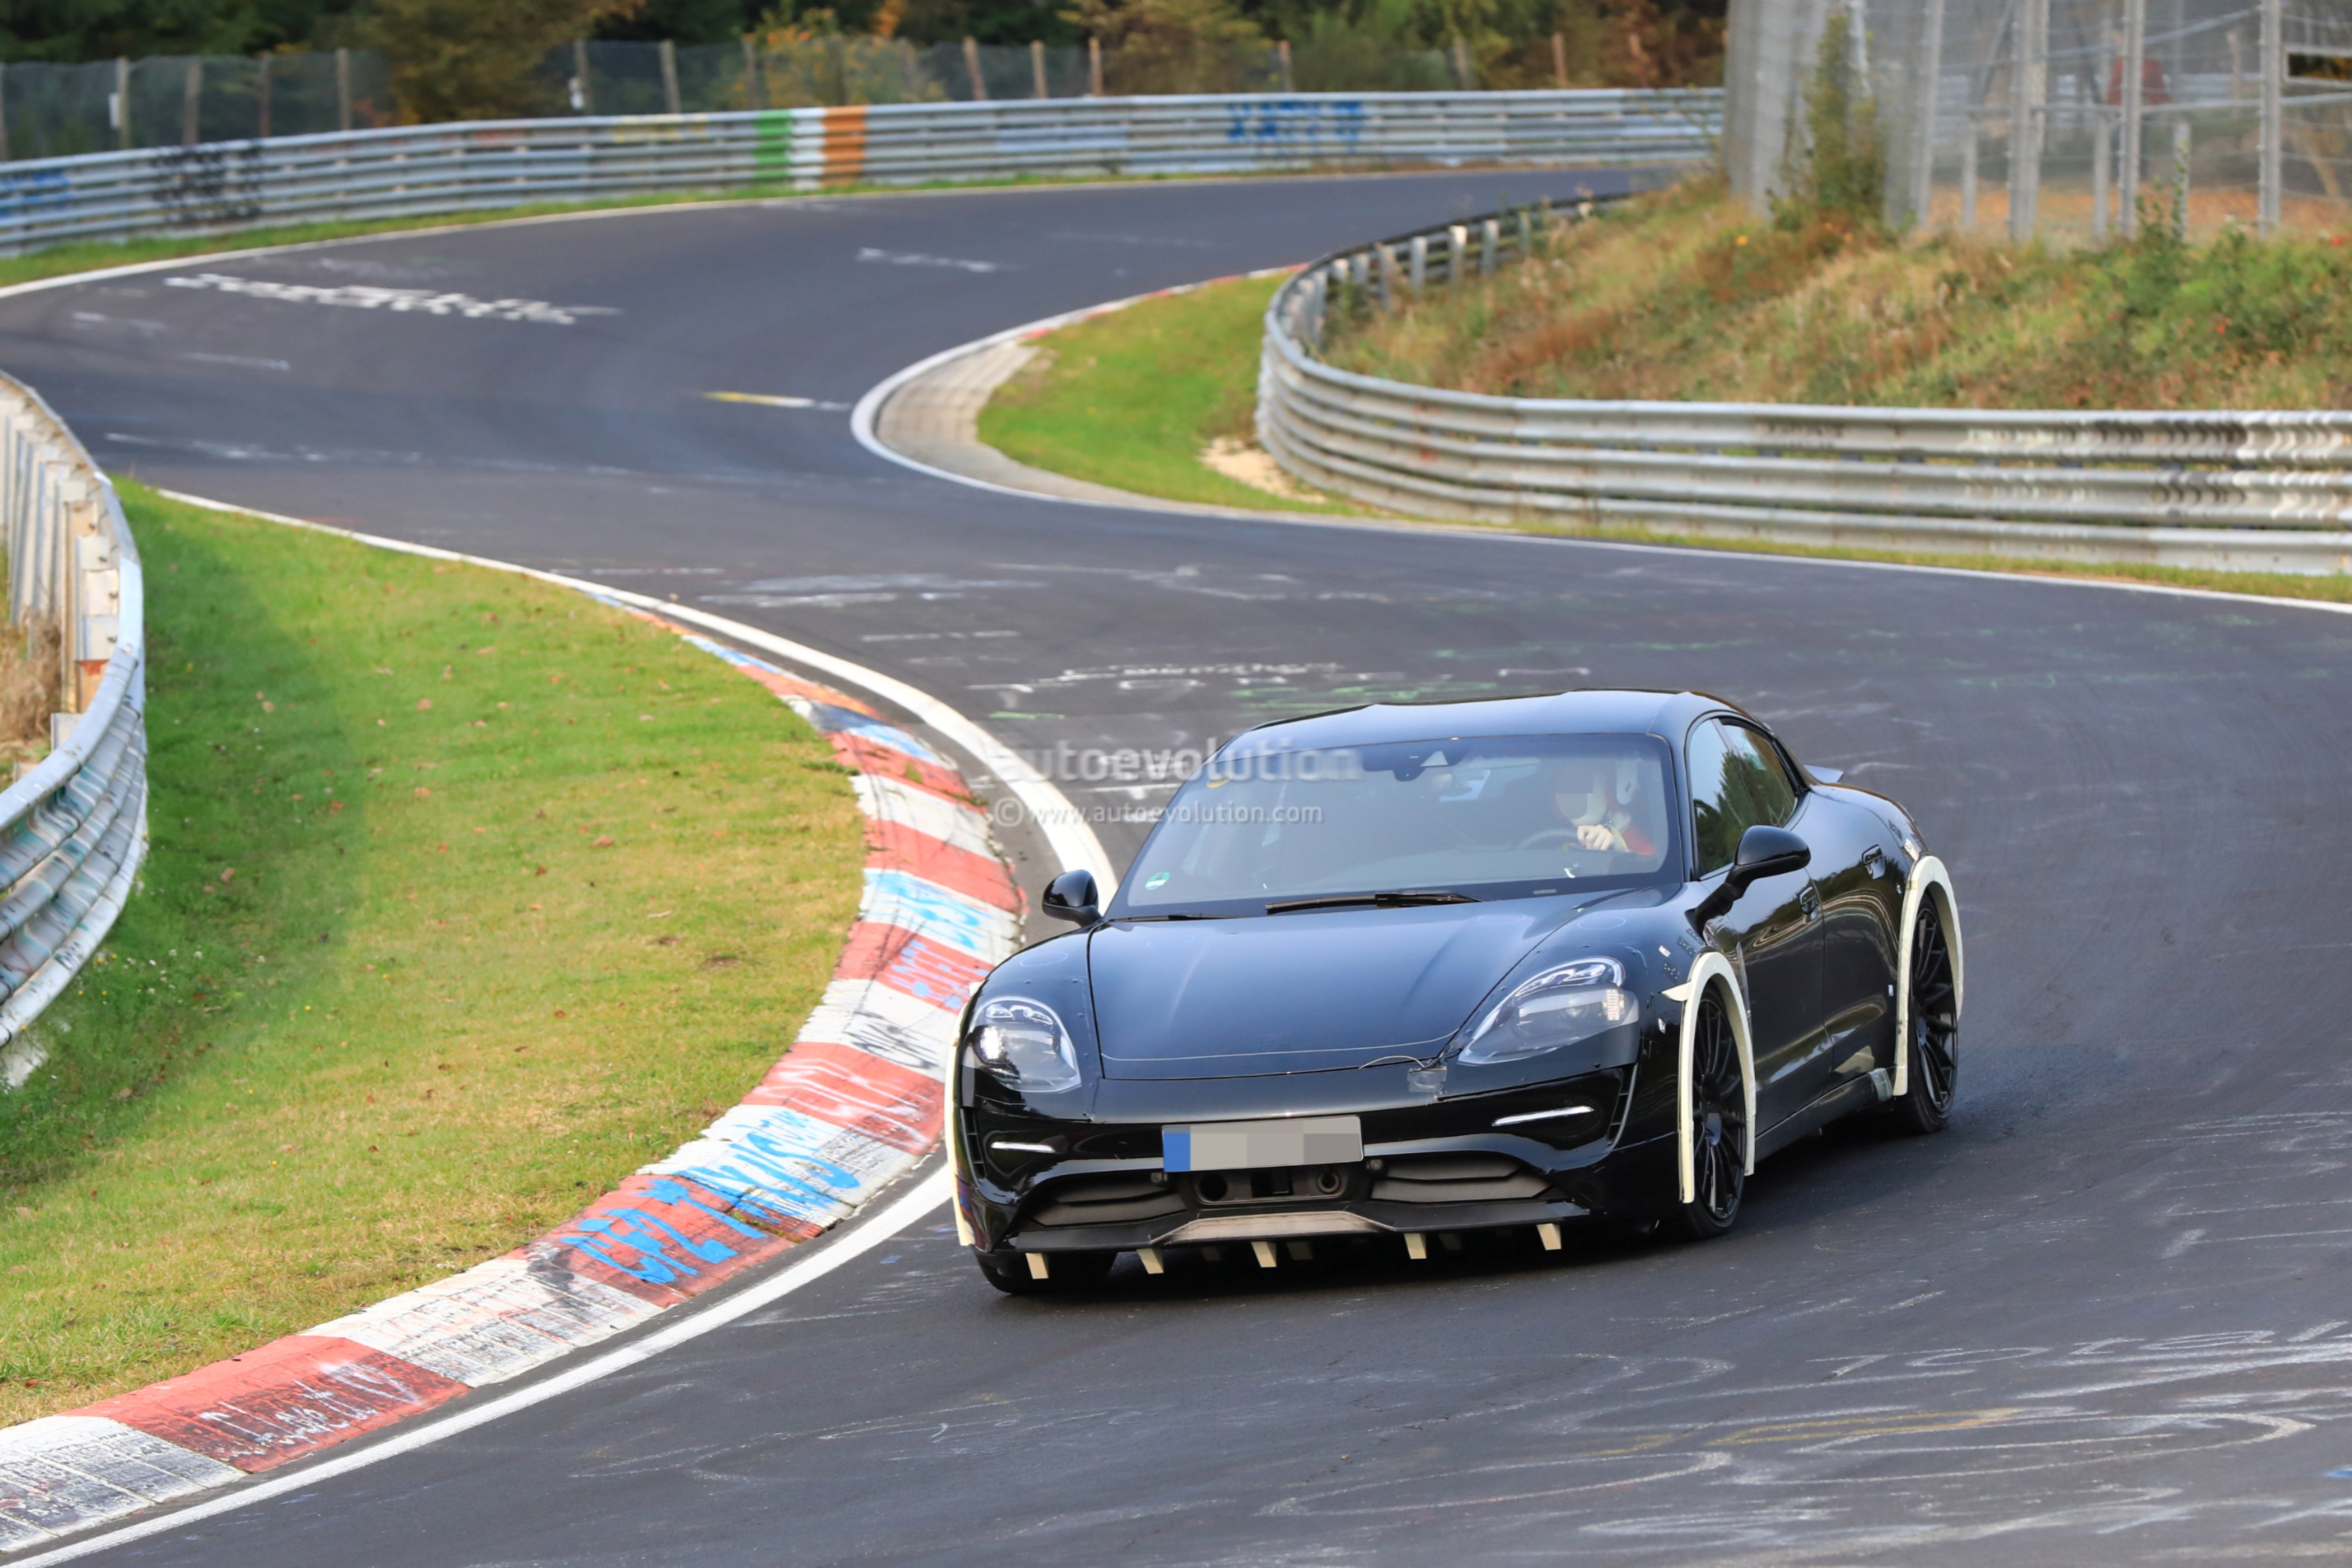 2019-porsche-mission-e-electric-sports-sedan-shows-up-at-the-nurburgring_2.jpg